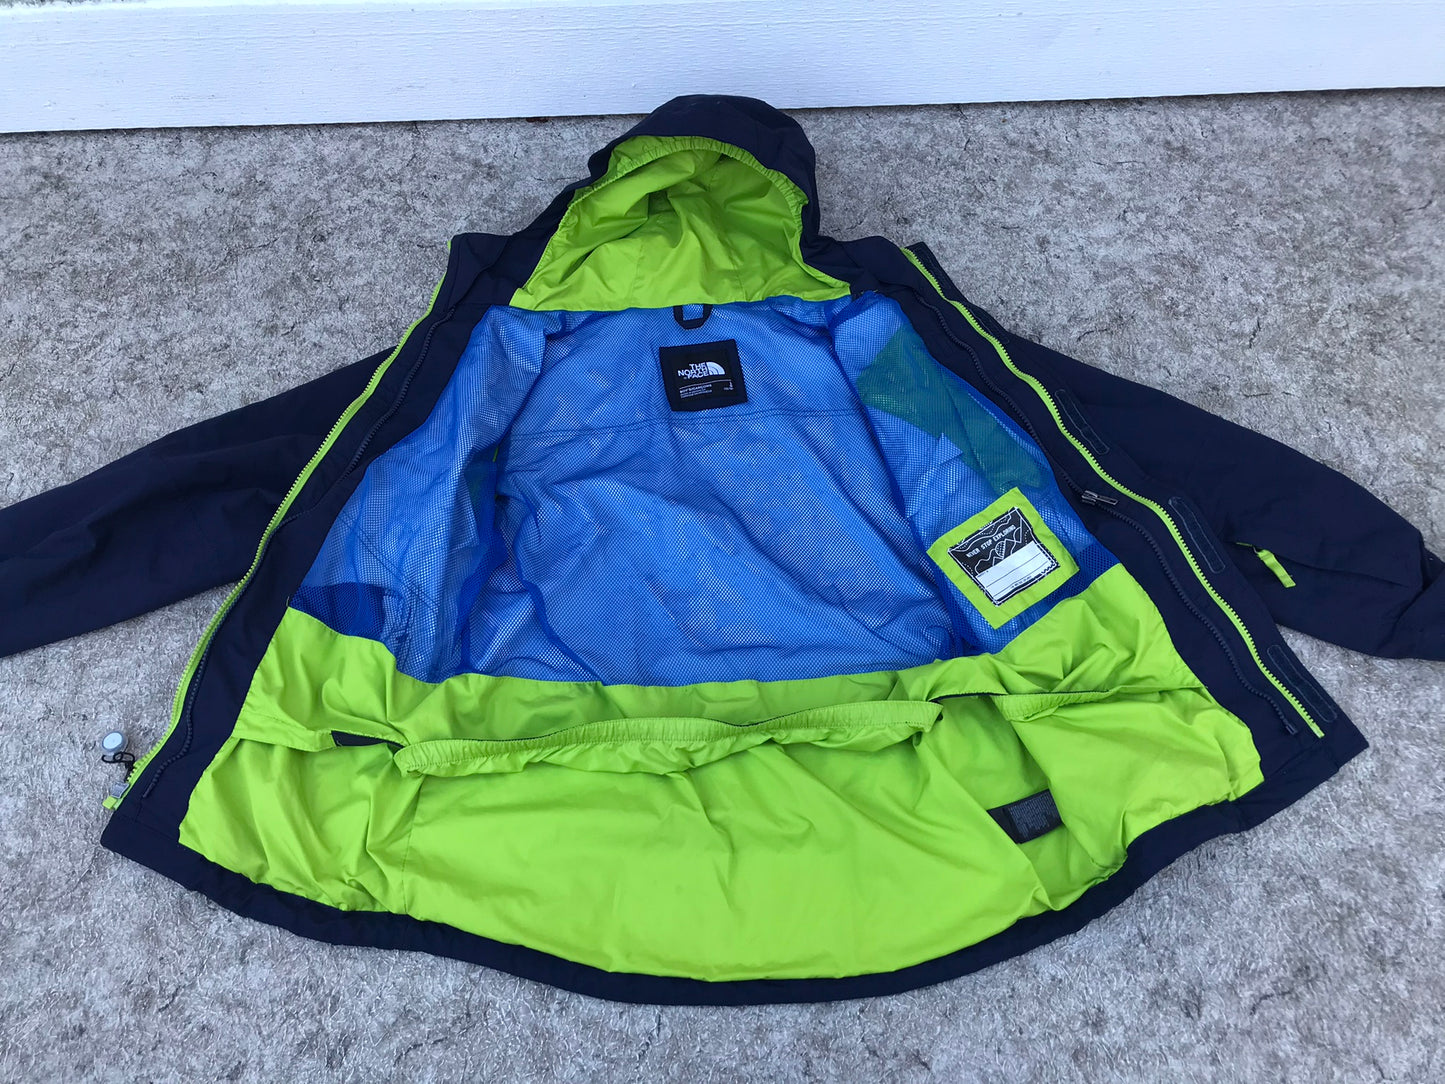 Rain Coat Child Size 14-16 The North Face Navy and Lime Works Well For Spring Skiing Too